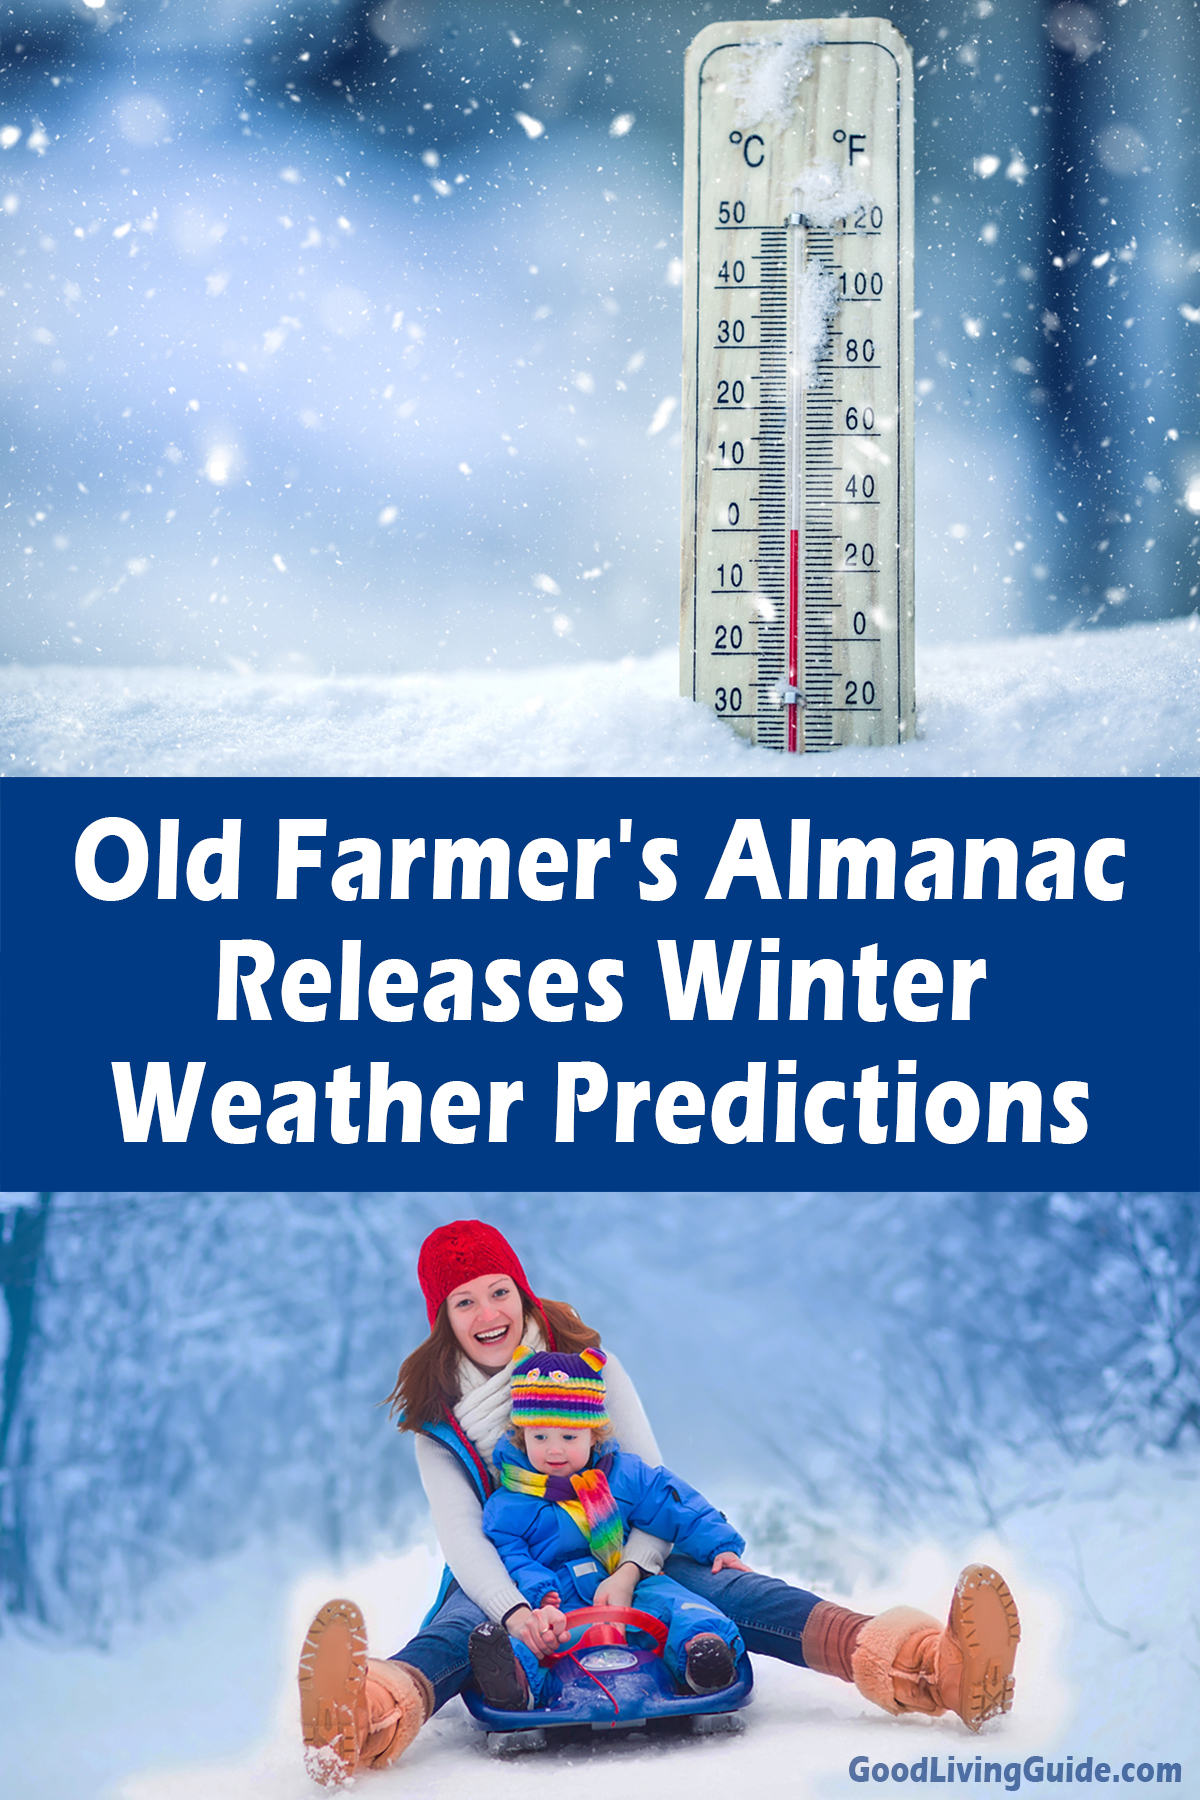 Old Farmer's Almanac Releases Winter Weather Predictions for 2023-2024